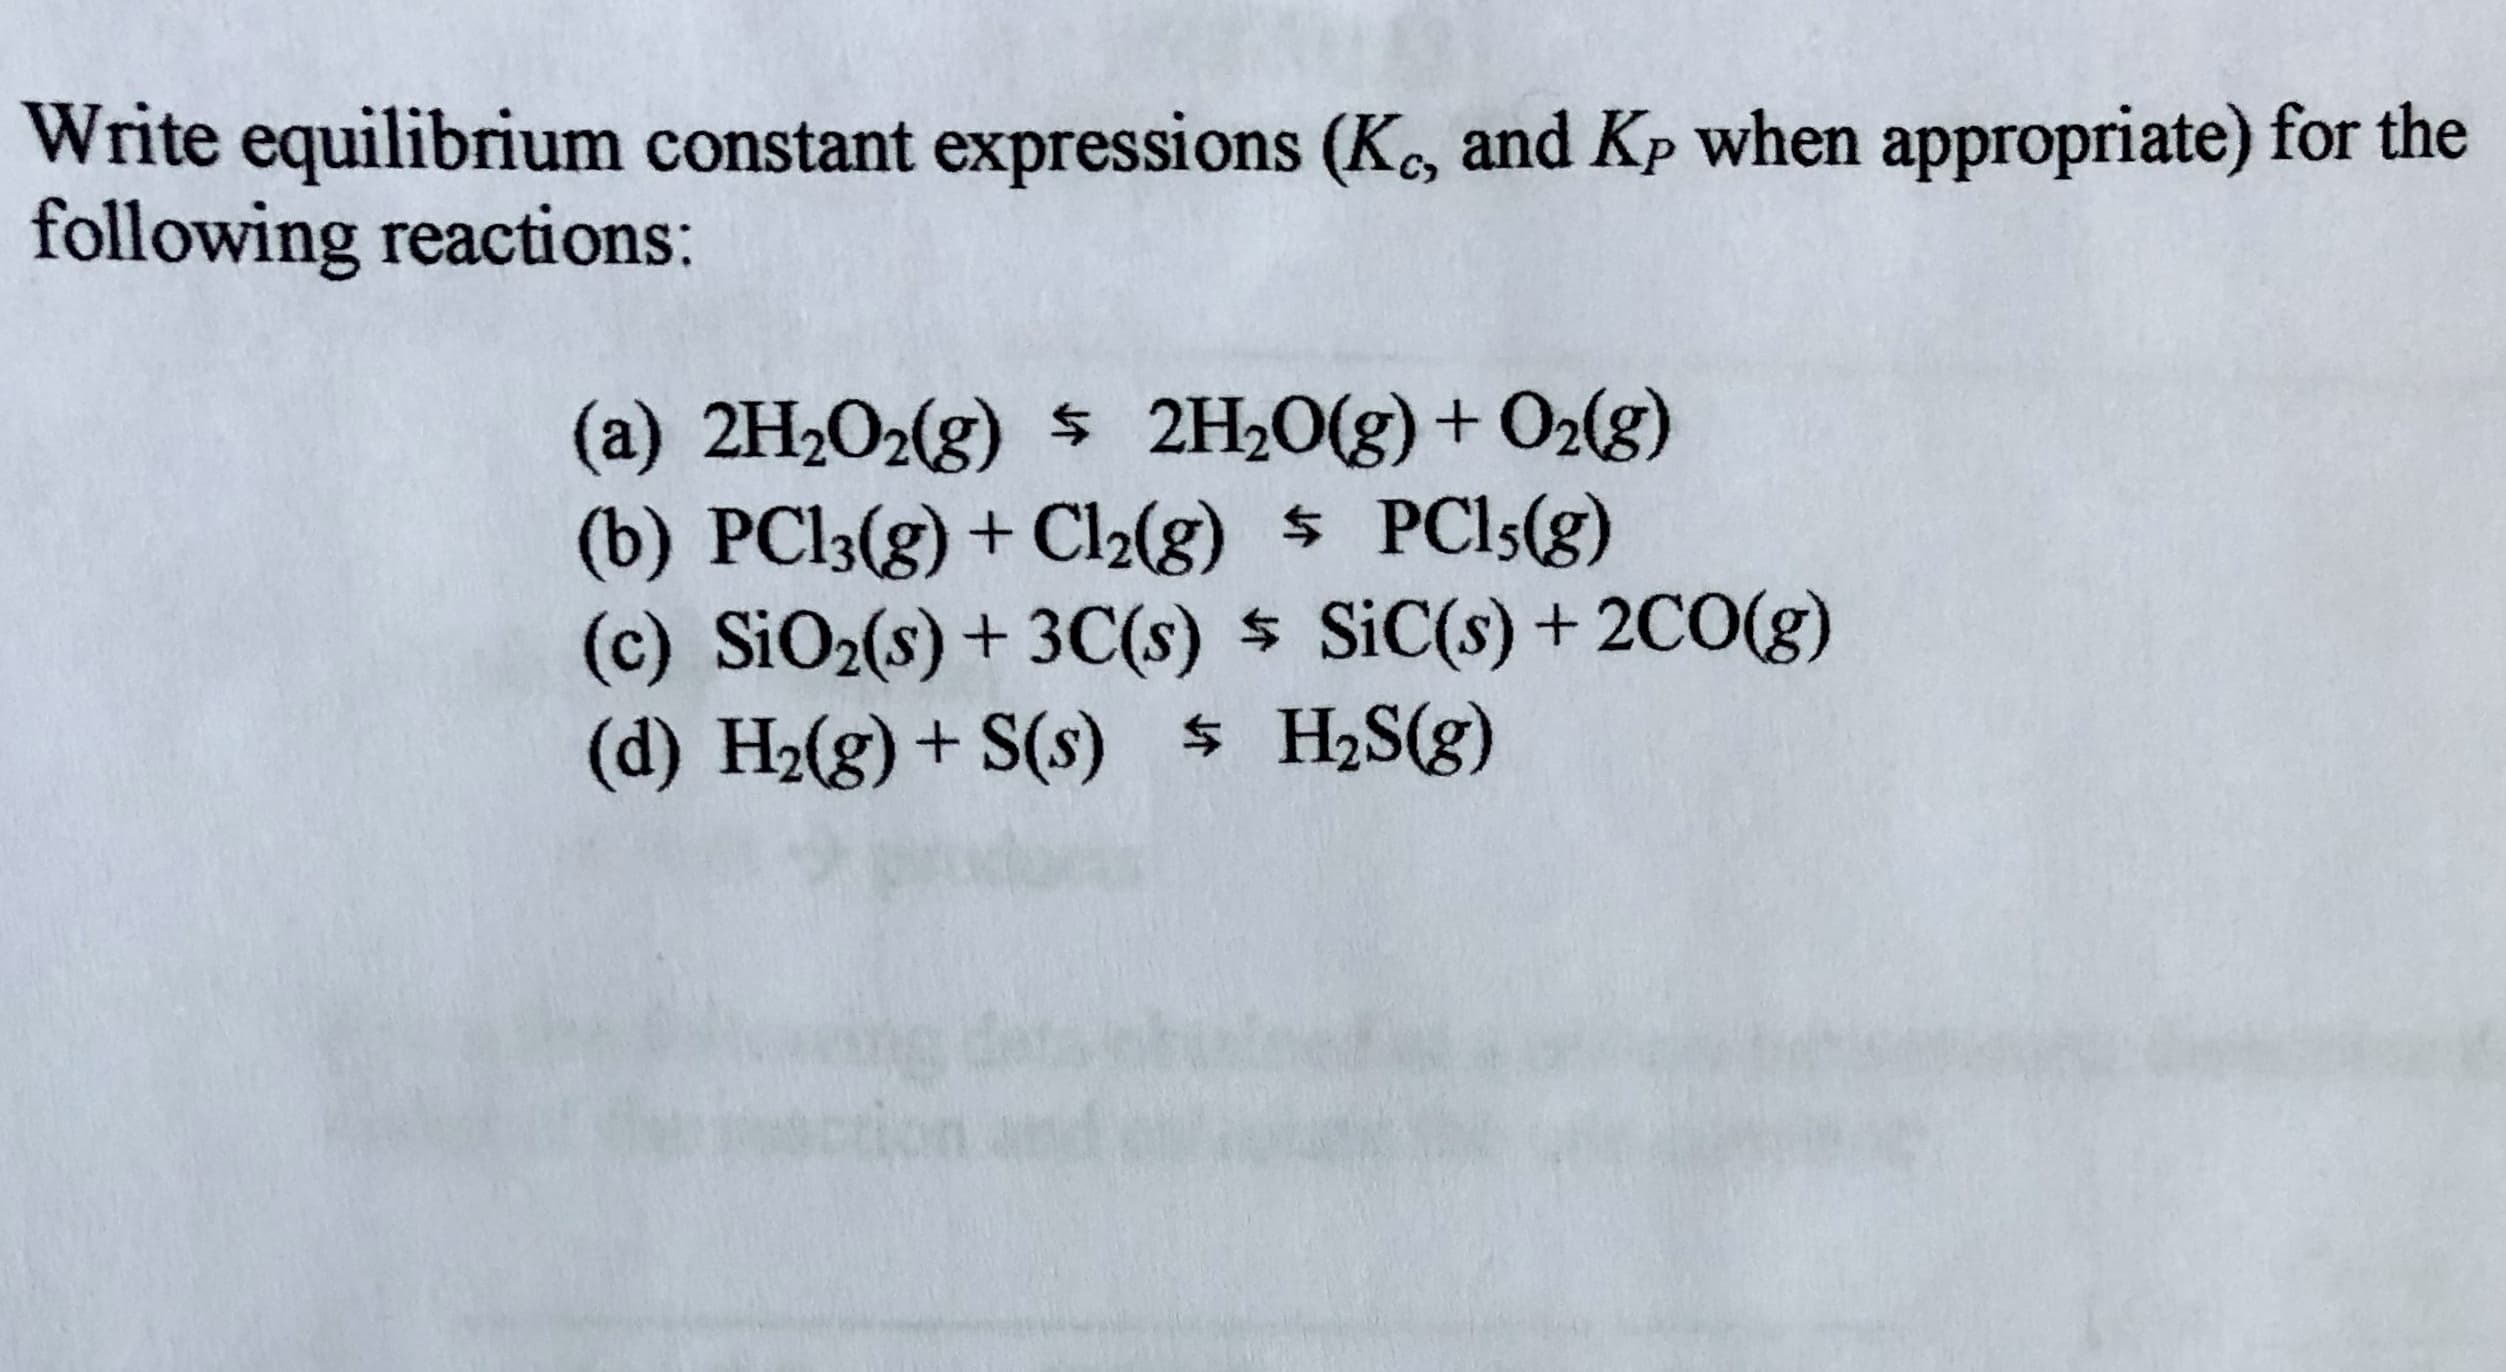 Write equilibrium constant expressions (K, and Kp when appropriate) for the
following reactions:
(a) 2H2O2(g) $ 2H20(g)+ O2(g)
(b) PCI3(g) + Cl2(g) $ PCI5(g)
(c) SiO2(s) + 3C(s) $ SiC(s) + 2CO(g)
(d) H2(g) + S(s) $ H2S(g)
